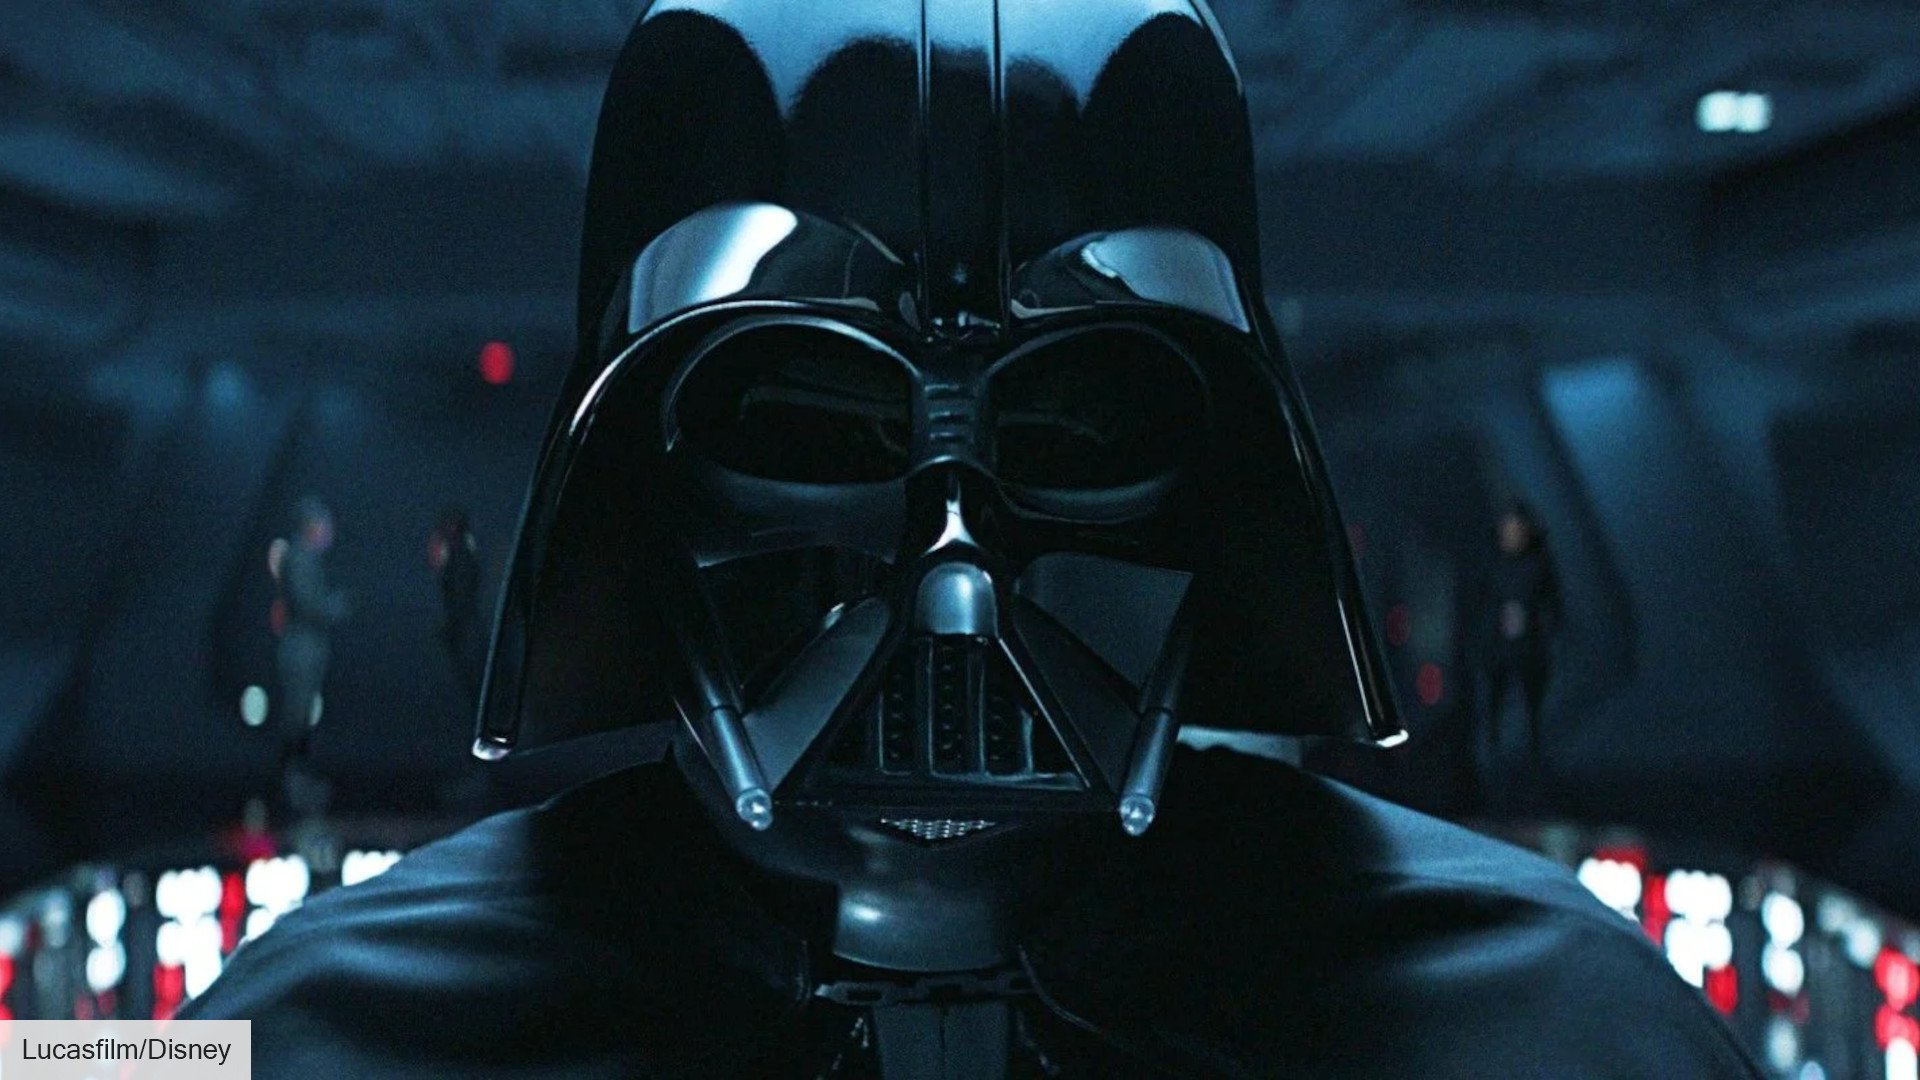 Darth Vader explained the Sith Lord's origin and powers in Star Wars | Digital Fix